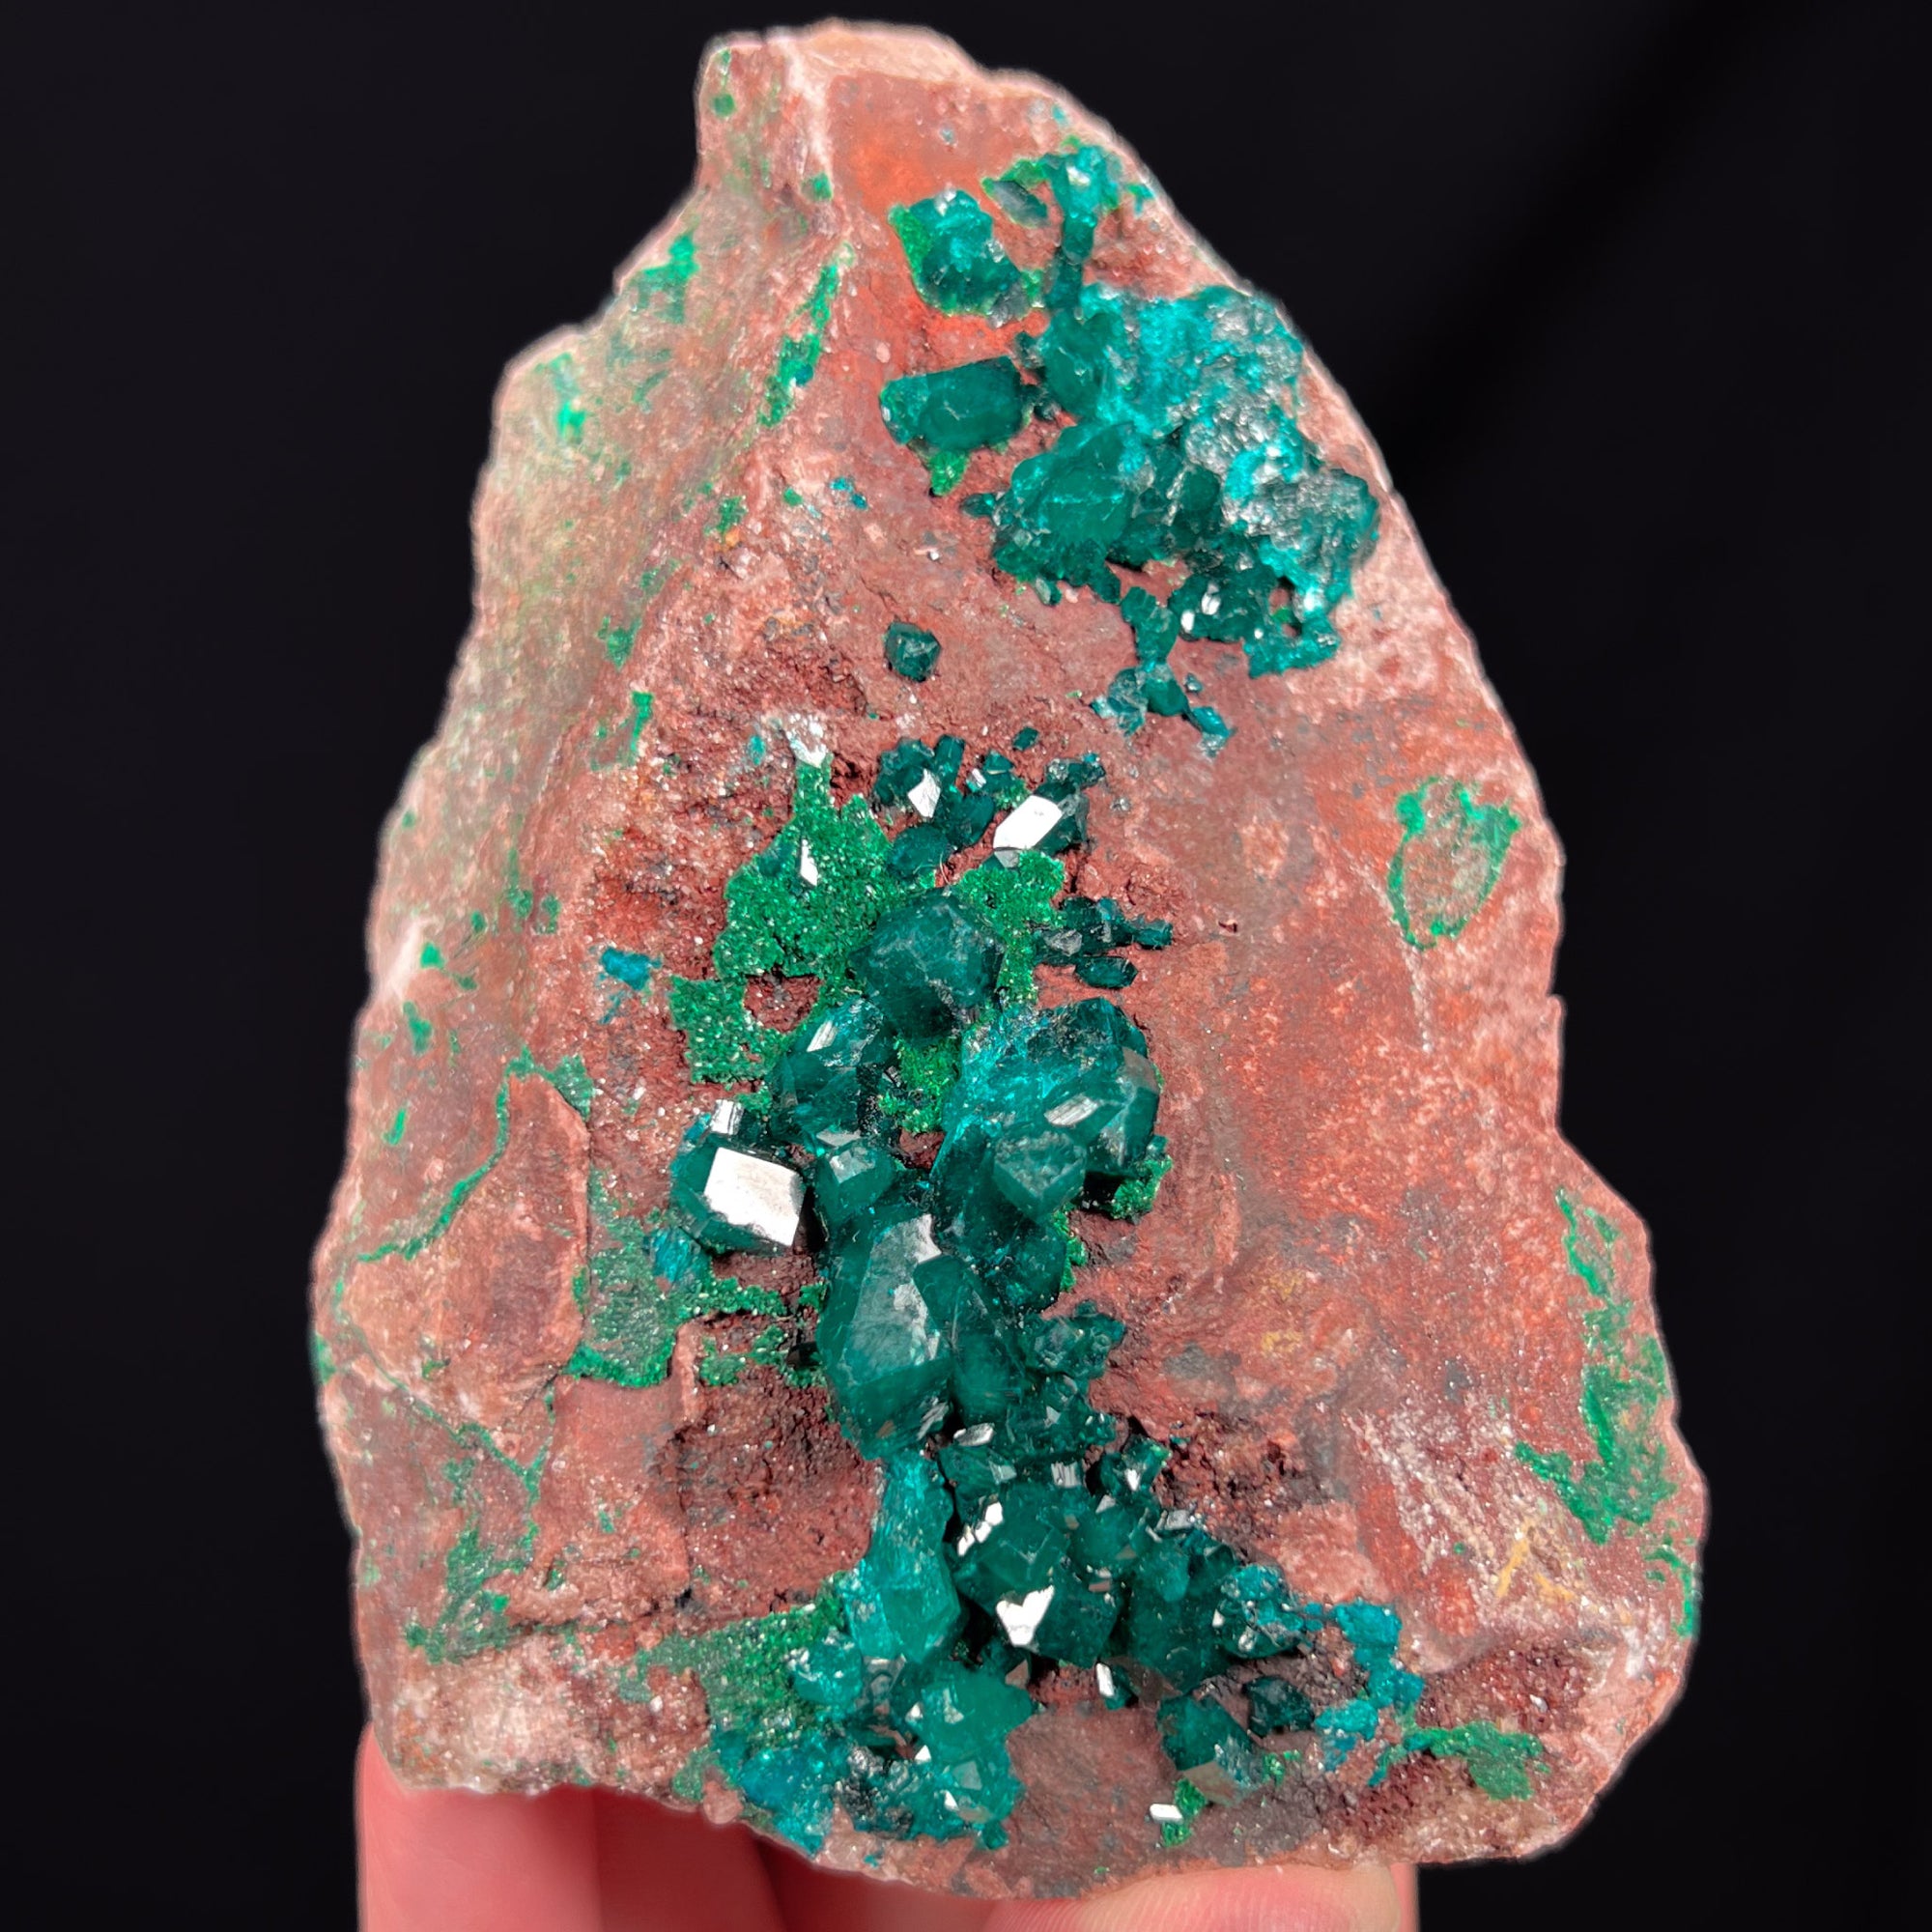 Large Dioptase Crystal Specimen with Malachite 